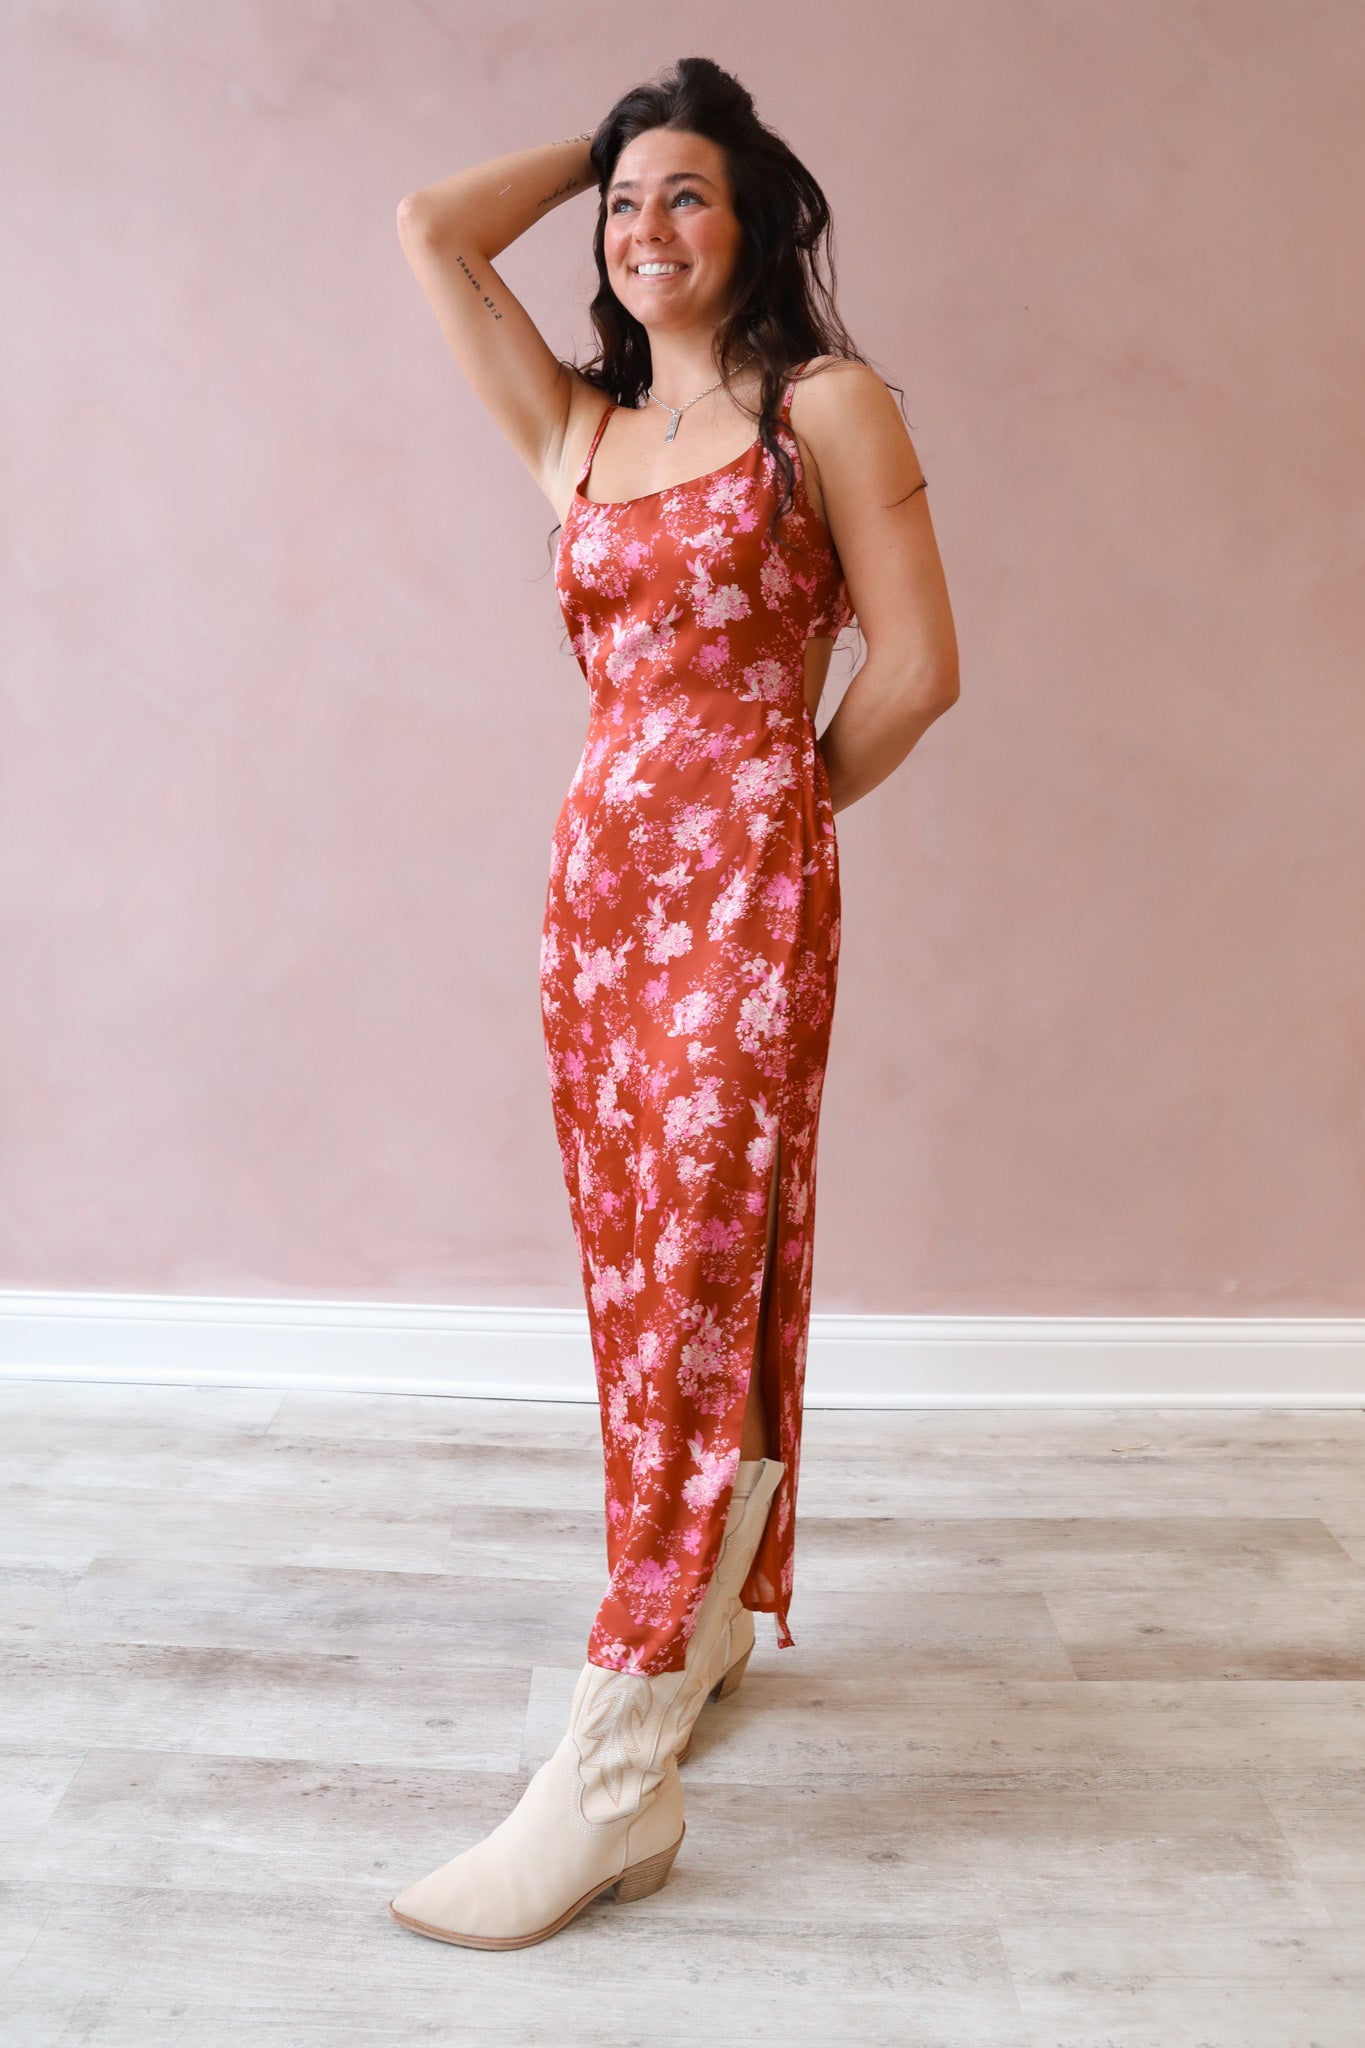 This long satin dress features a rosy pink floral design and a detailed back strap.